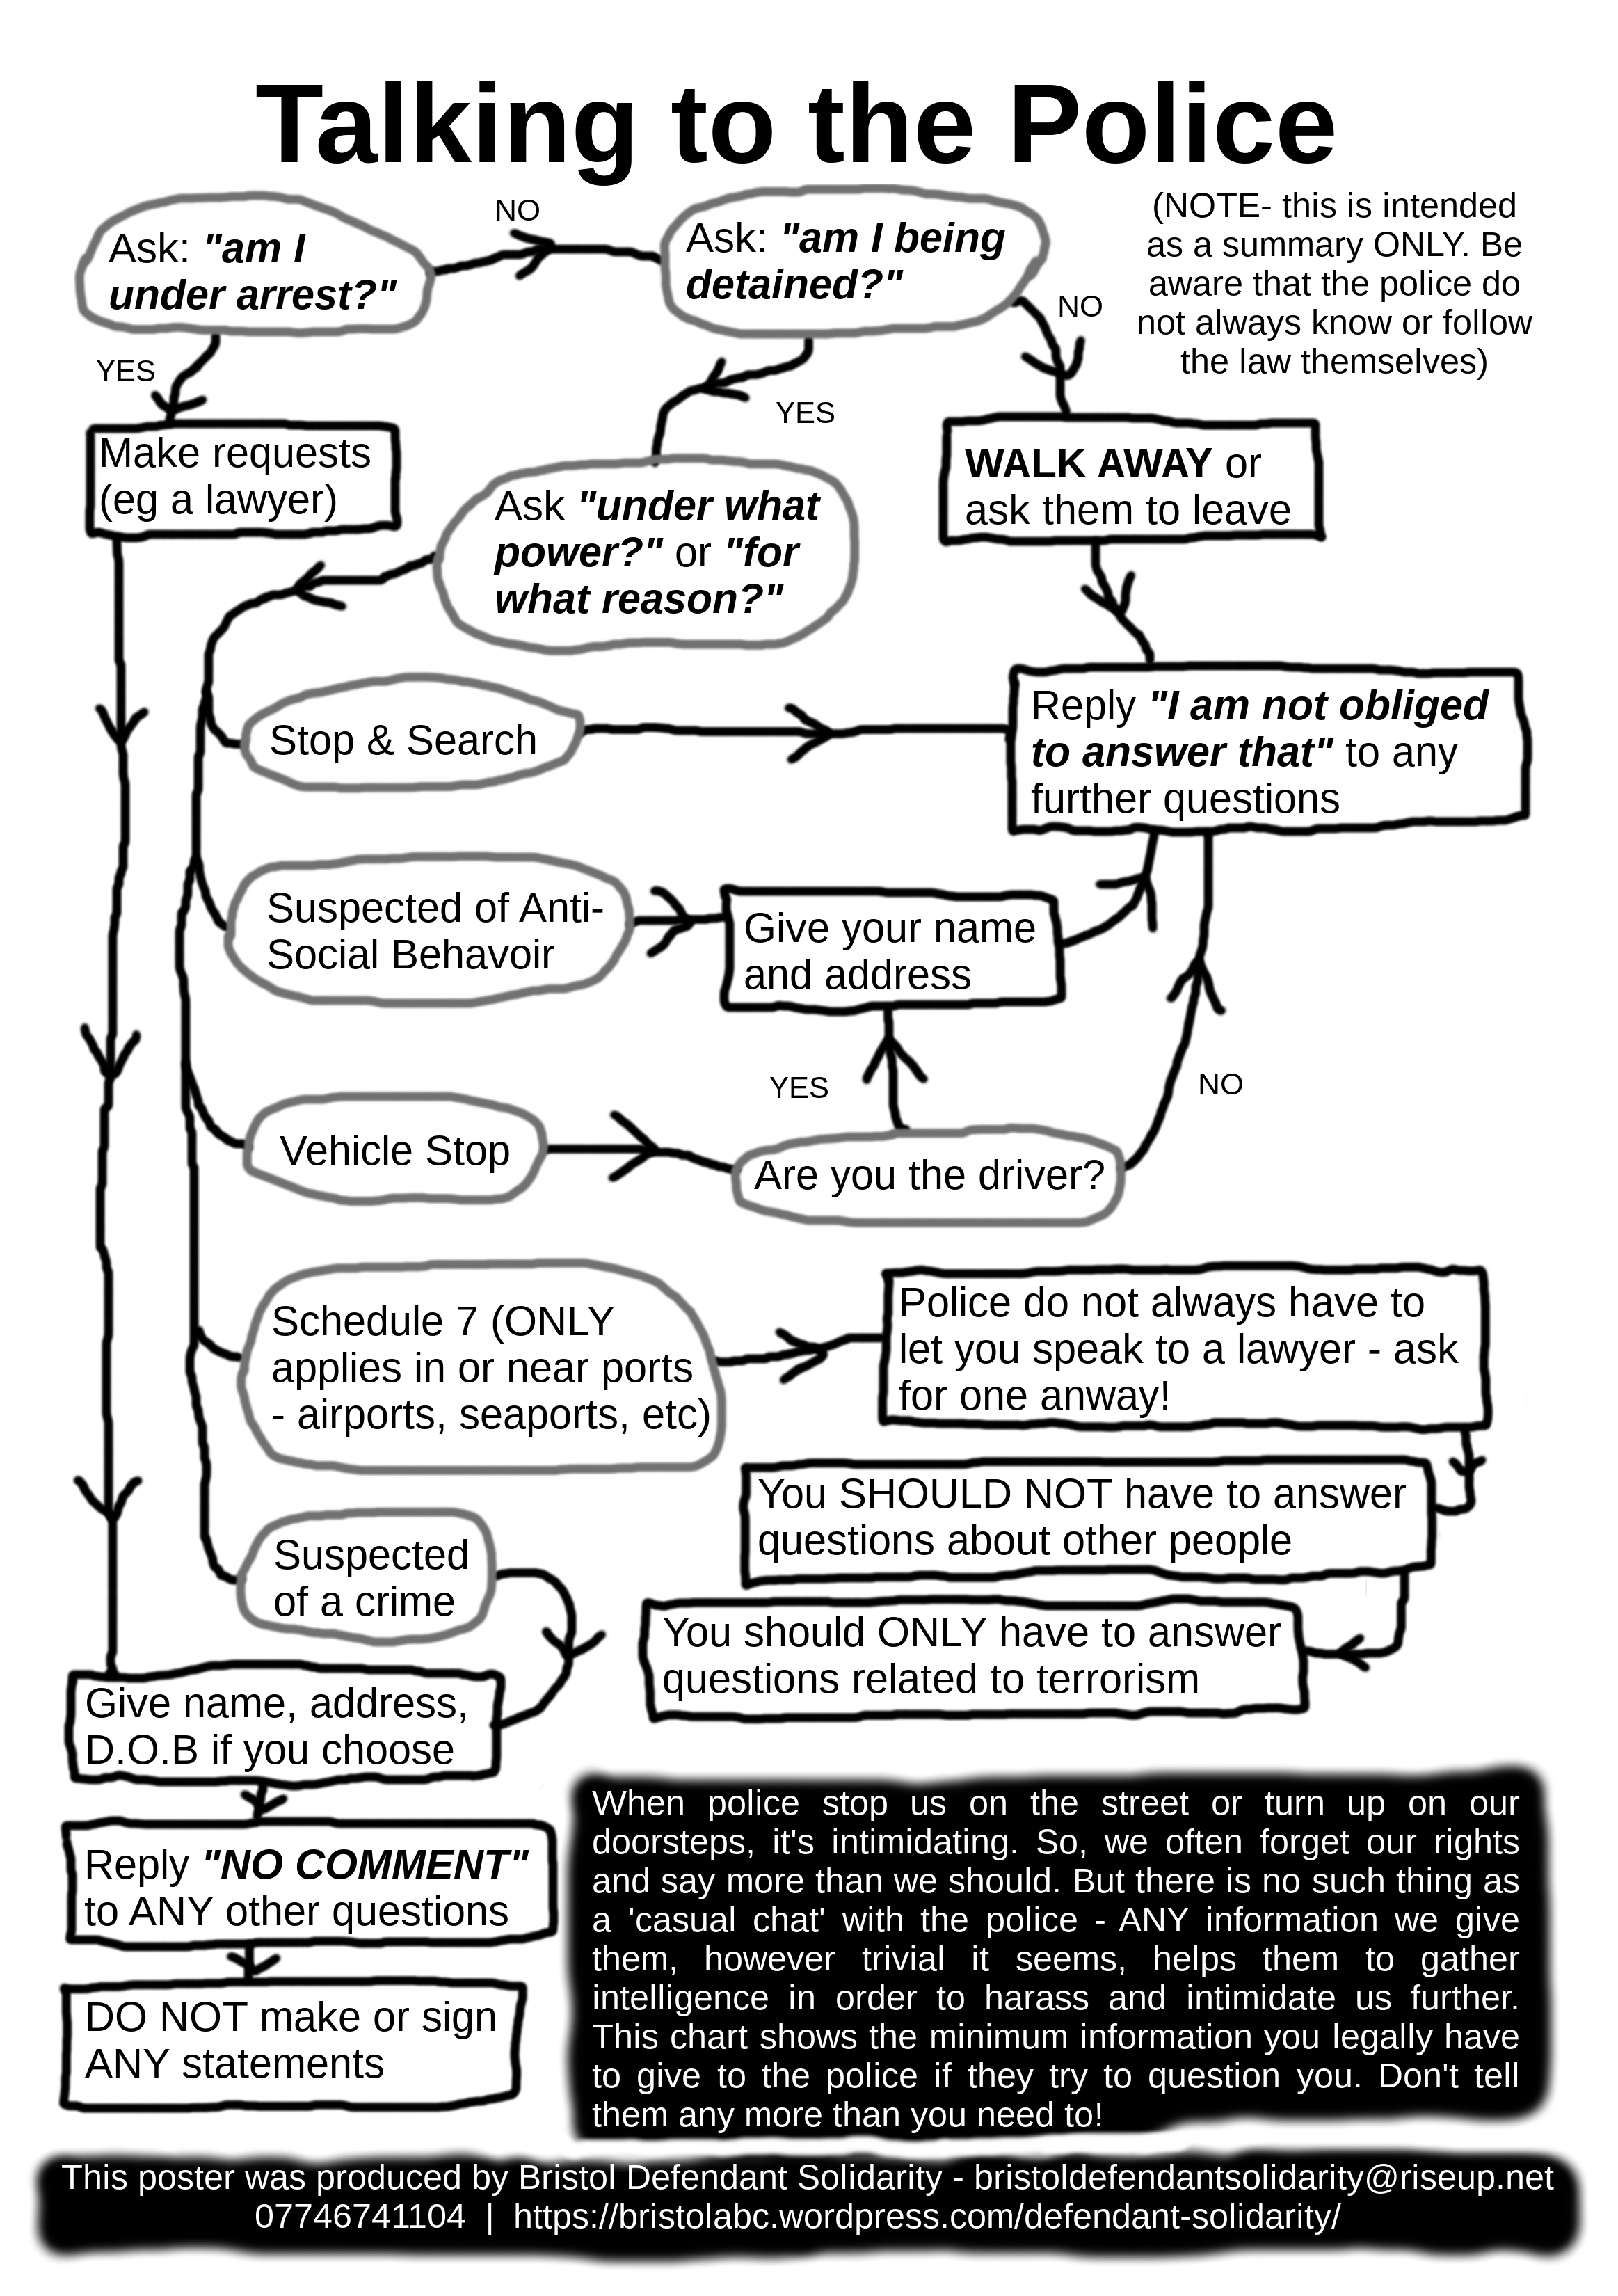 Flowchart summary of advice on interacting with police